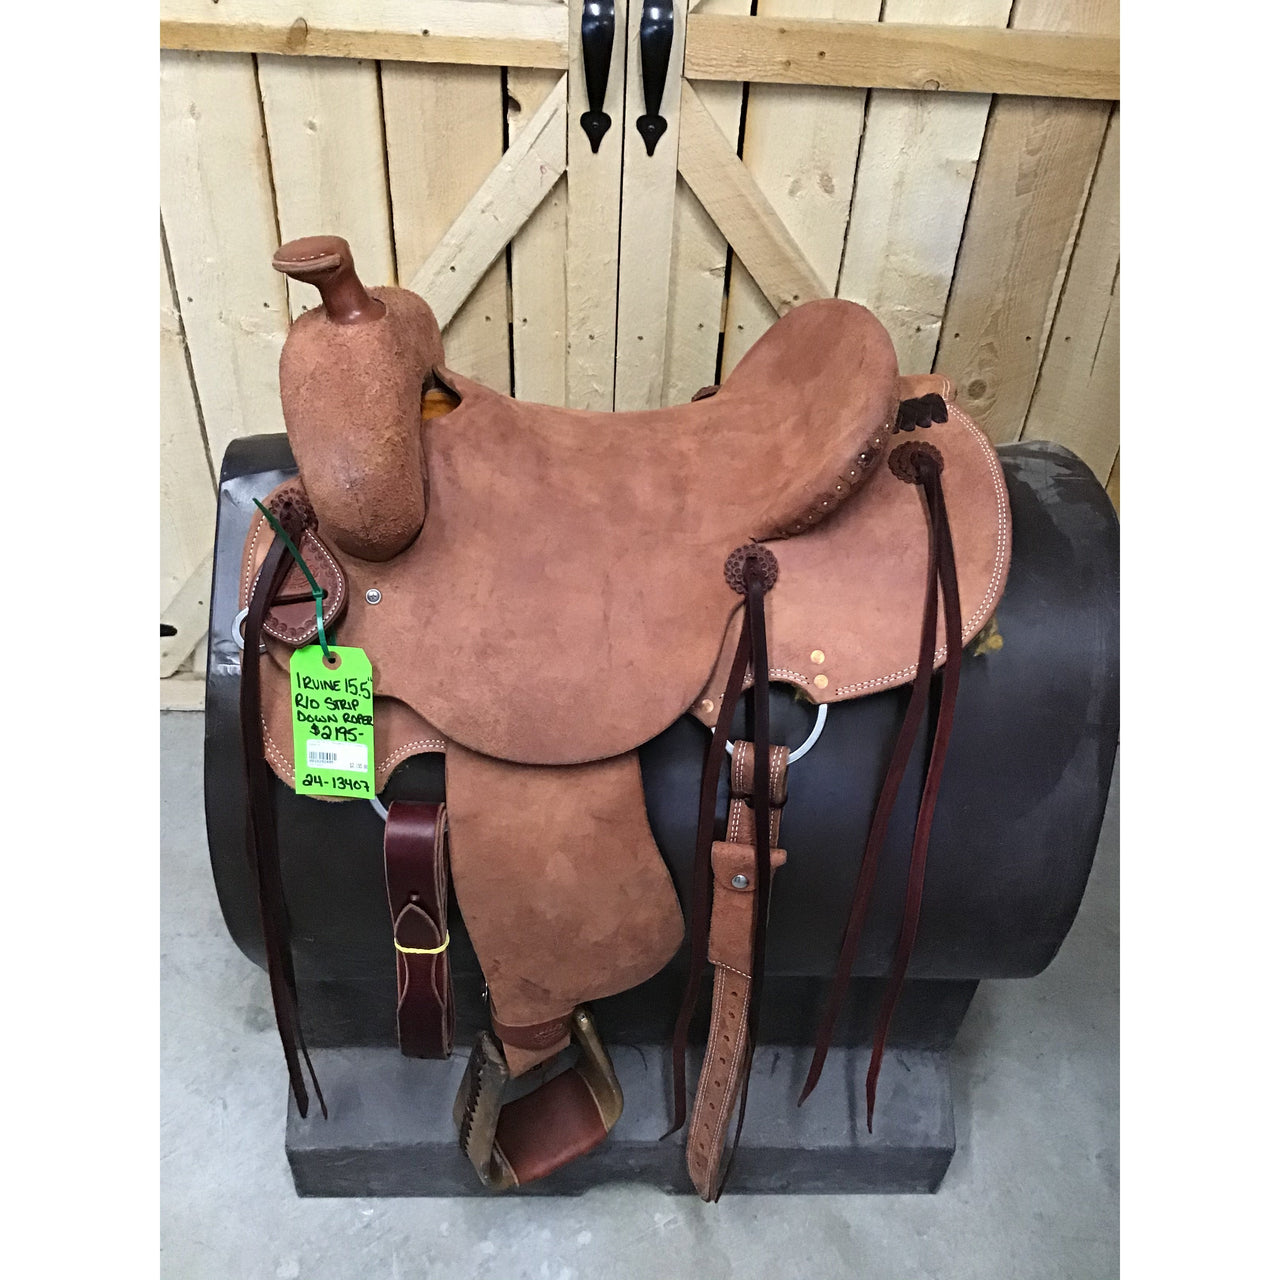 Irvine 15.5" Roughout Stripped Down Saddle